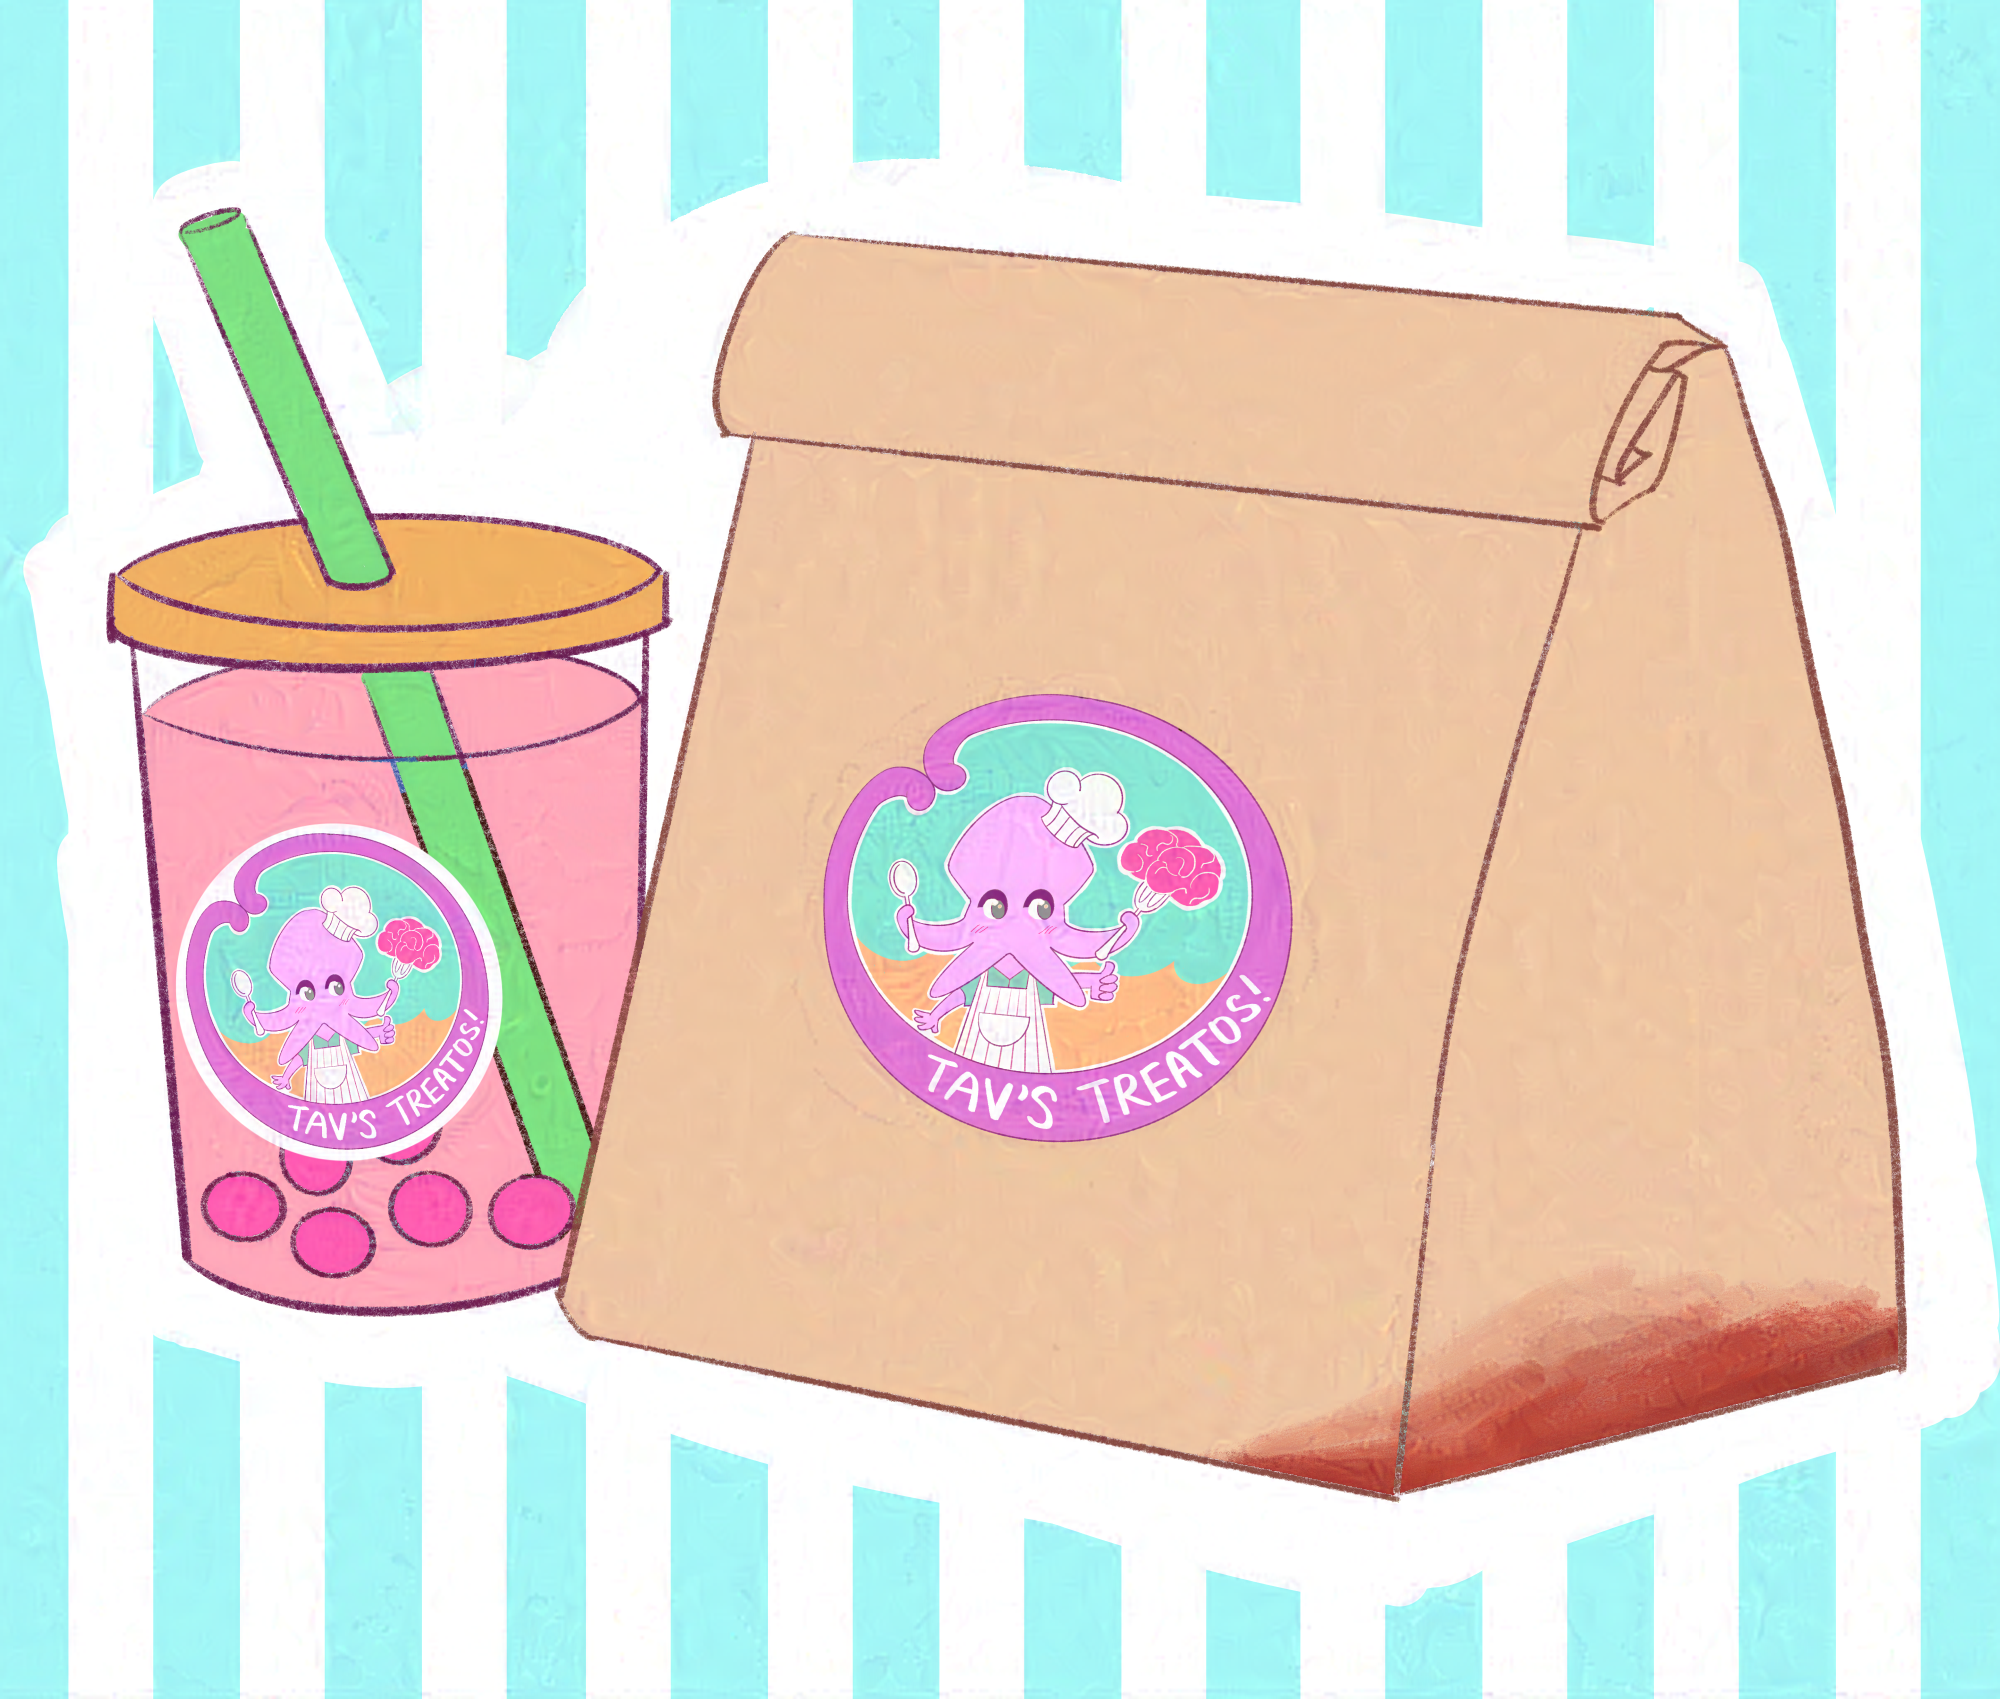 There's a pink bubble tea drink with red boba, and brown paper bag with the Tav's Treatos logo. The paper bag suspiciously has a red stain on its side.